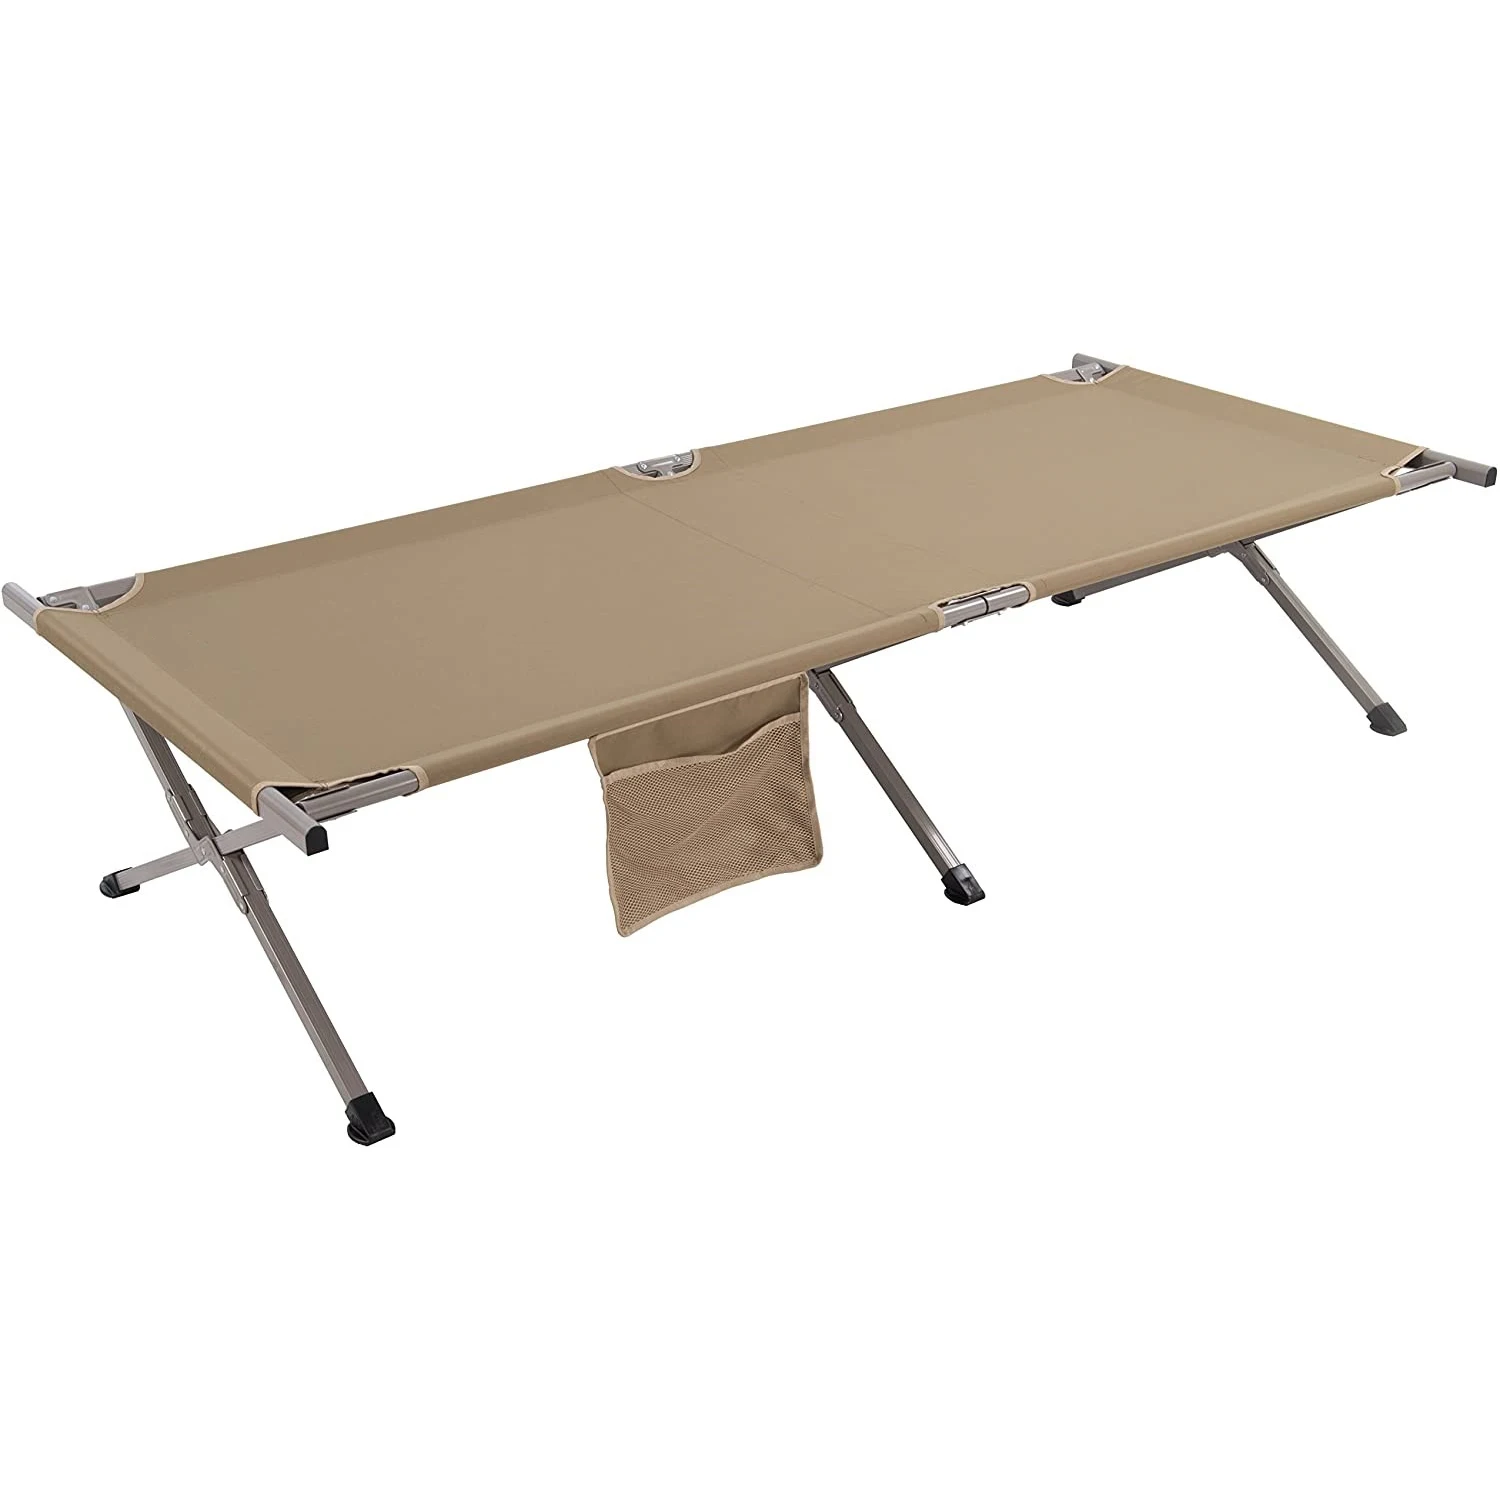 

Lightweight Camping Cot Bed Army Camping Bed Oxford Cloth Foldable Camping Bed, As picture